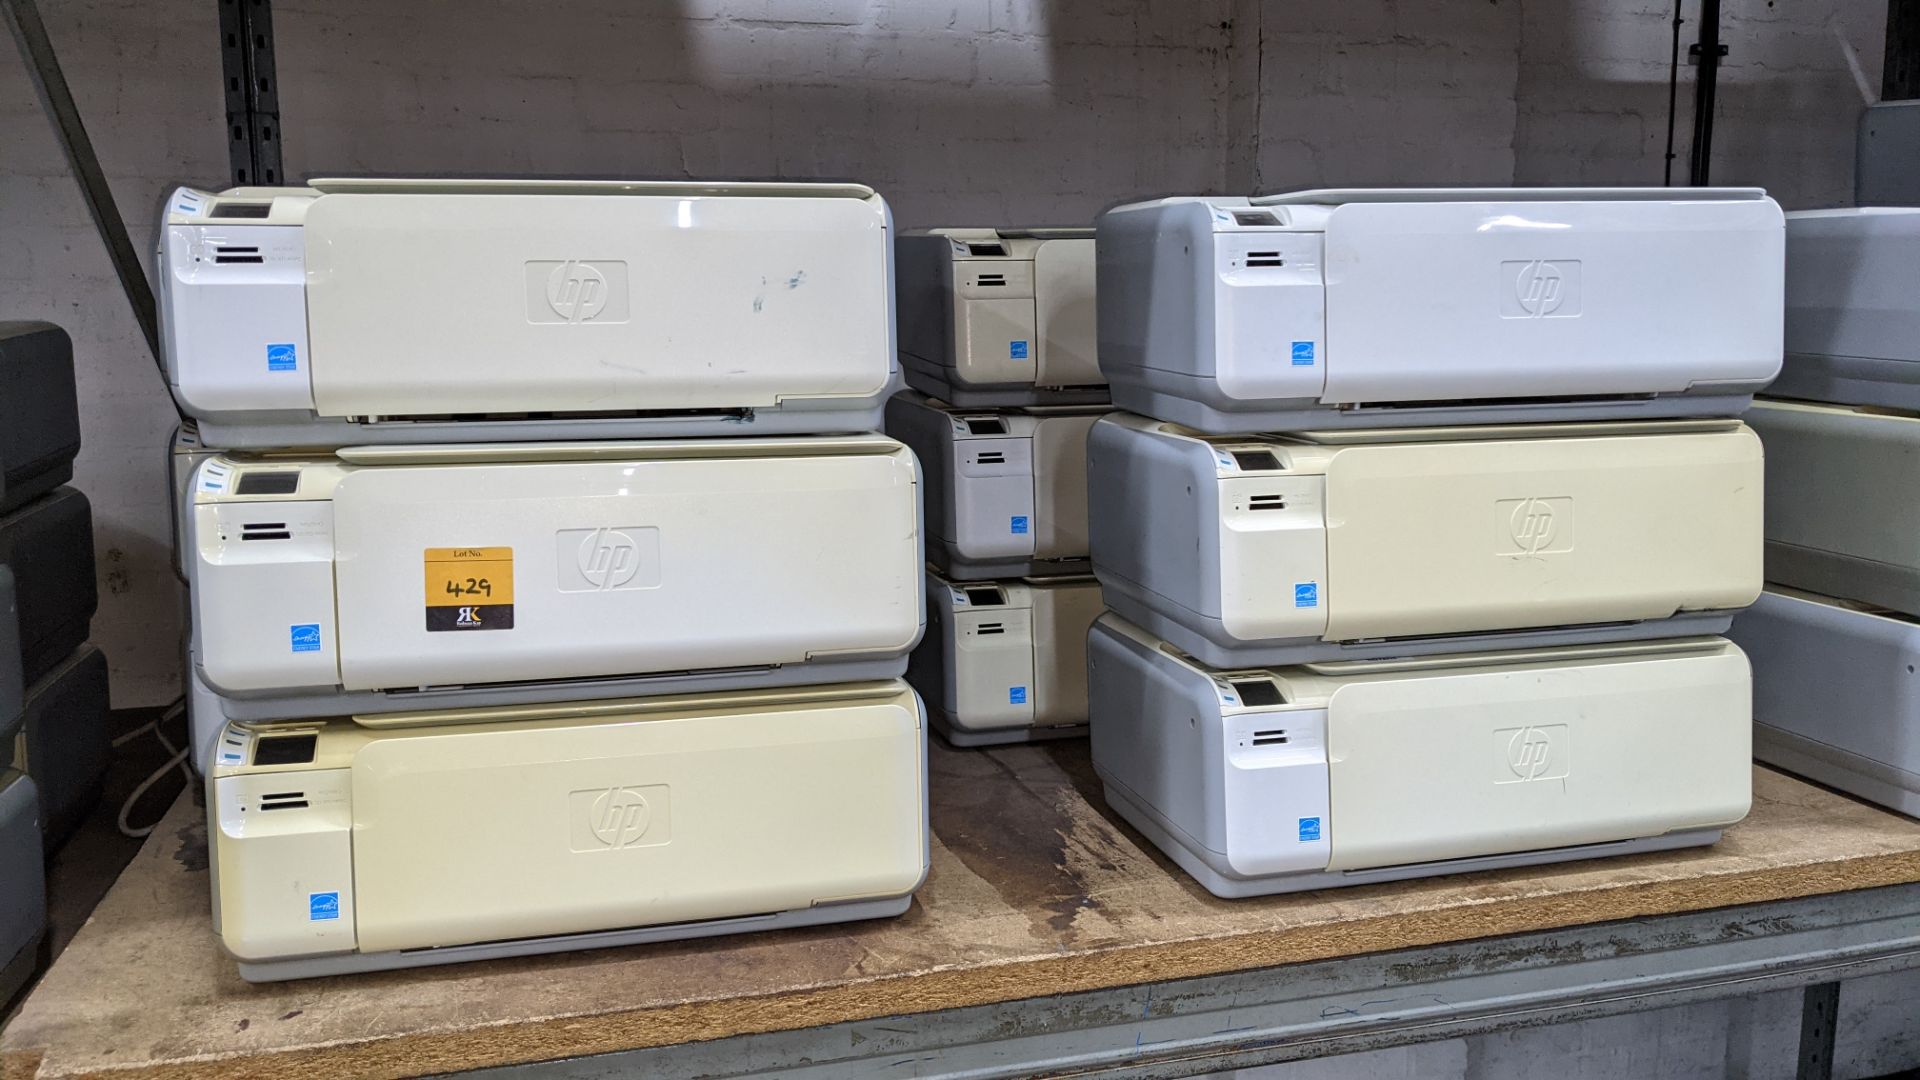 12 off HP Photo Smart C4480 printers NB. No power leads & cables